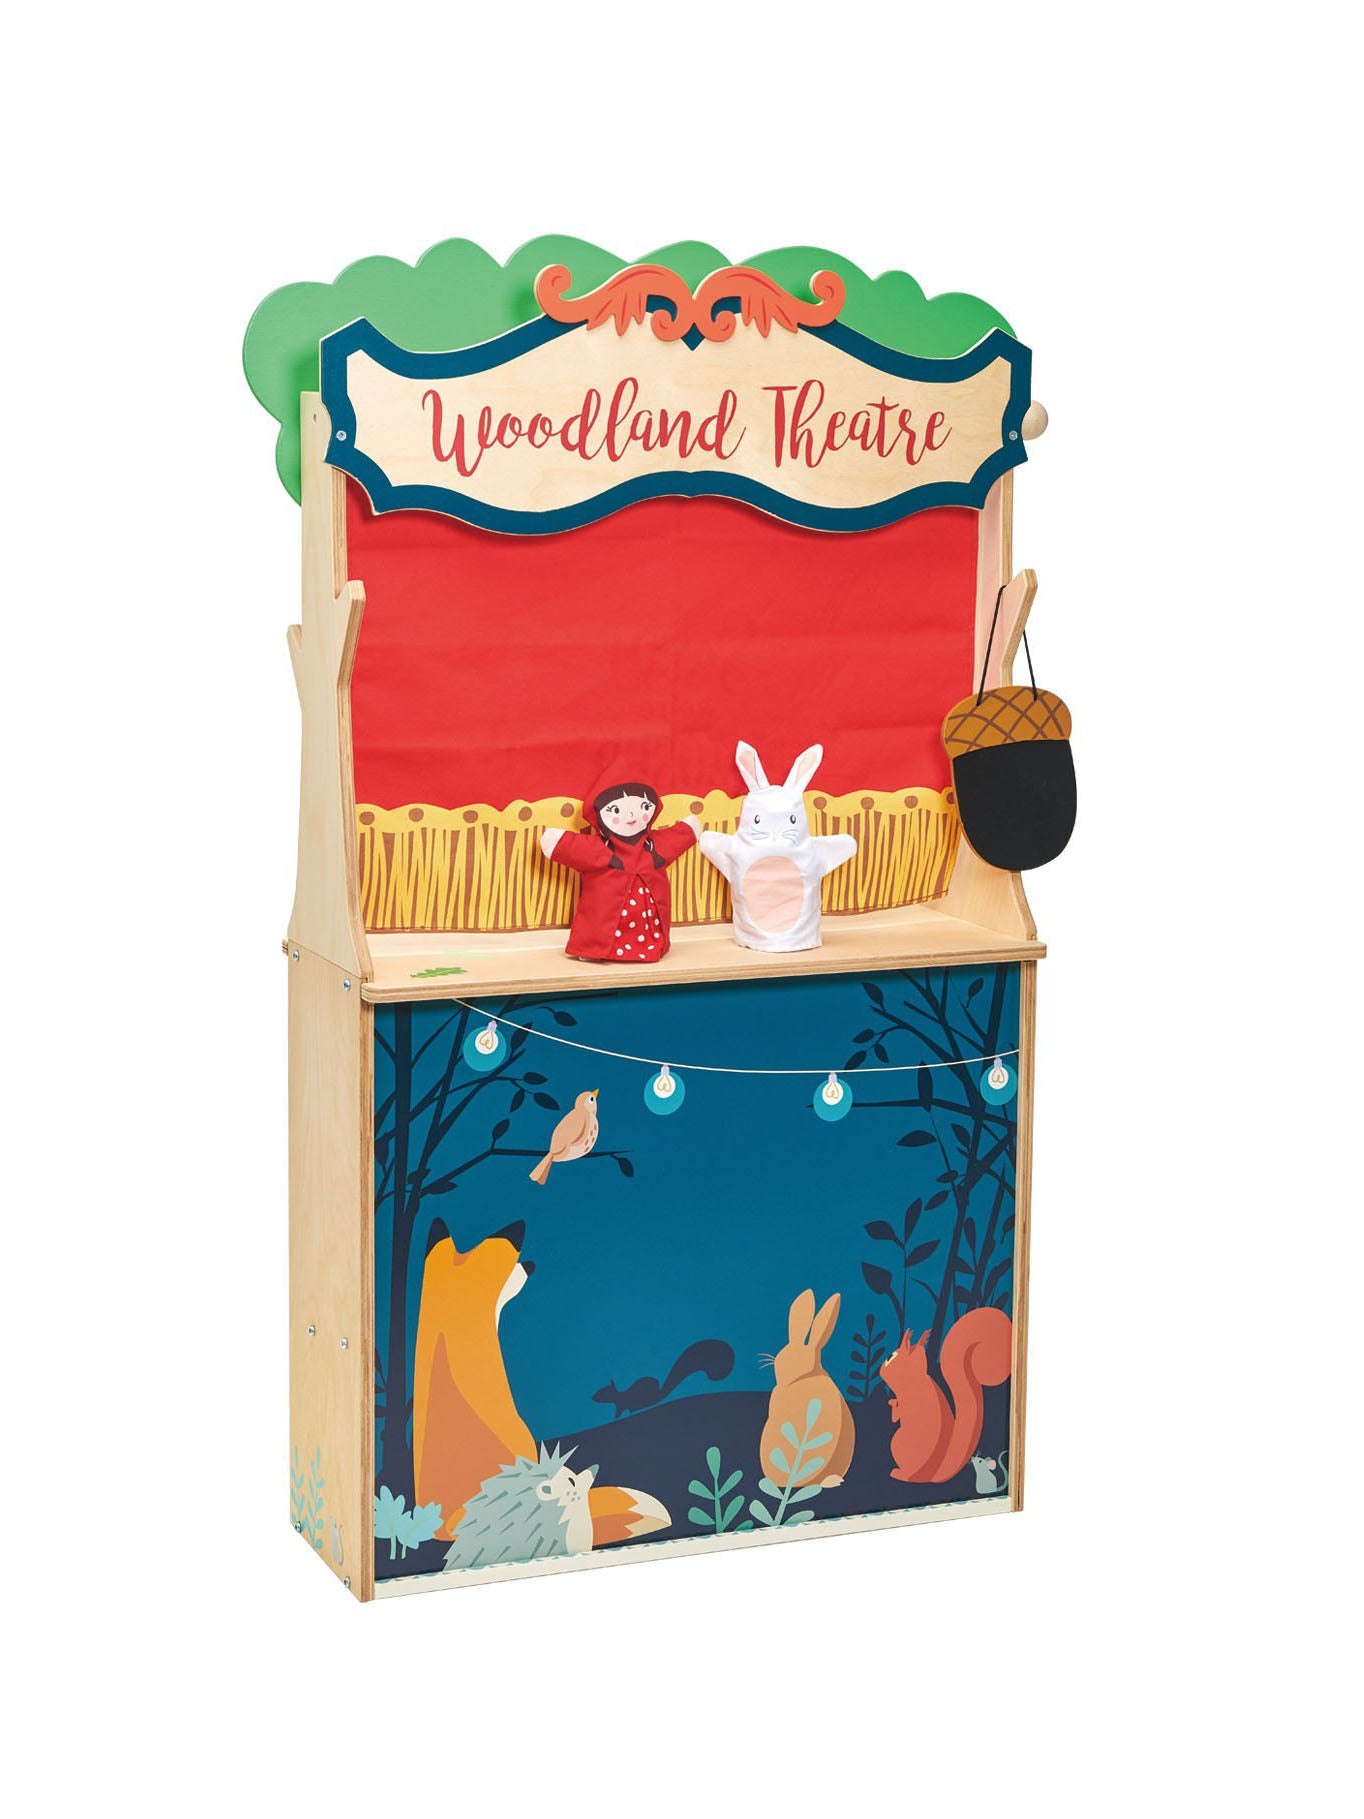 Tender Leaf Toys Woodland Stores and Theater Weston Table